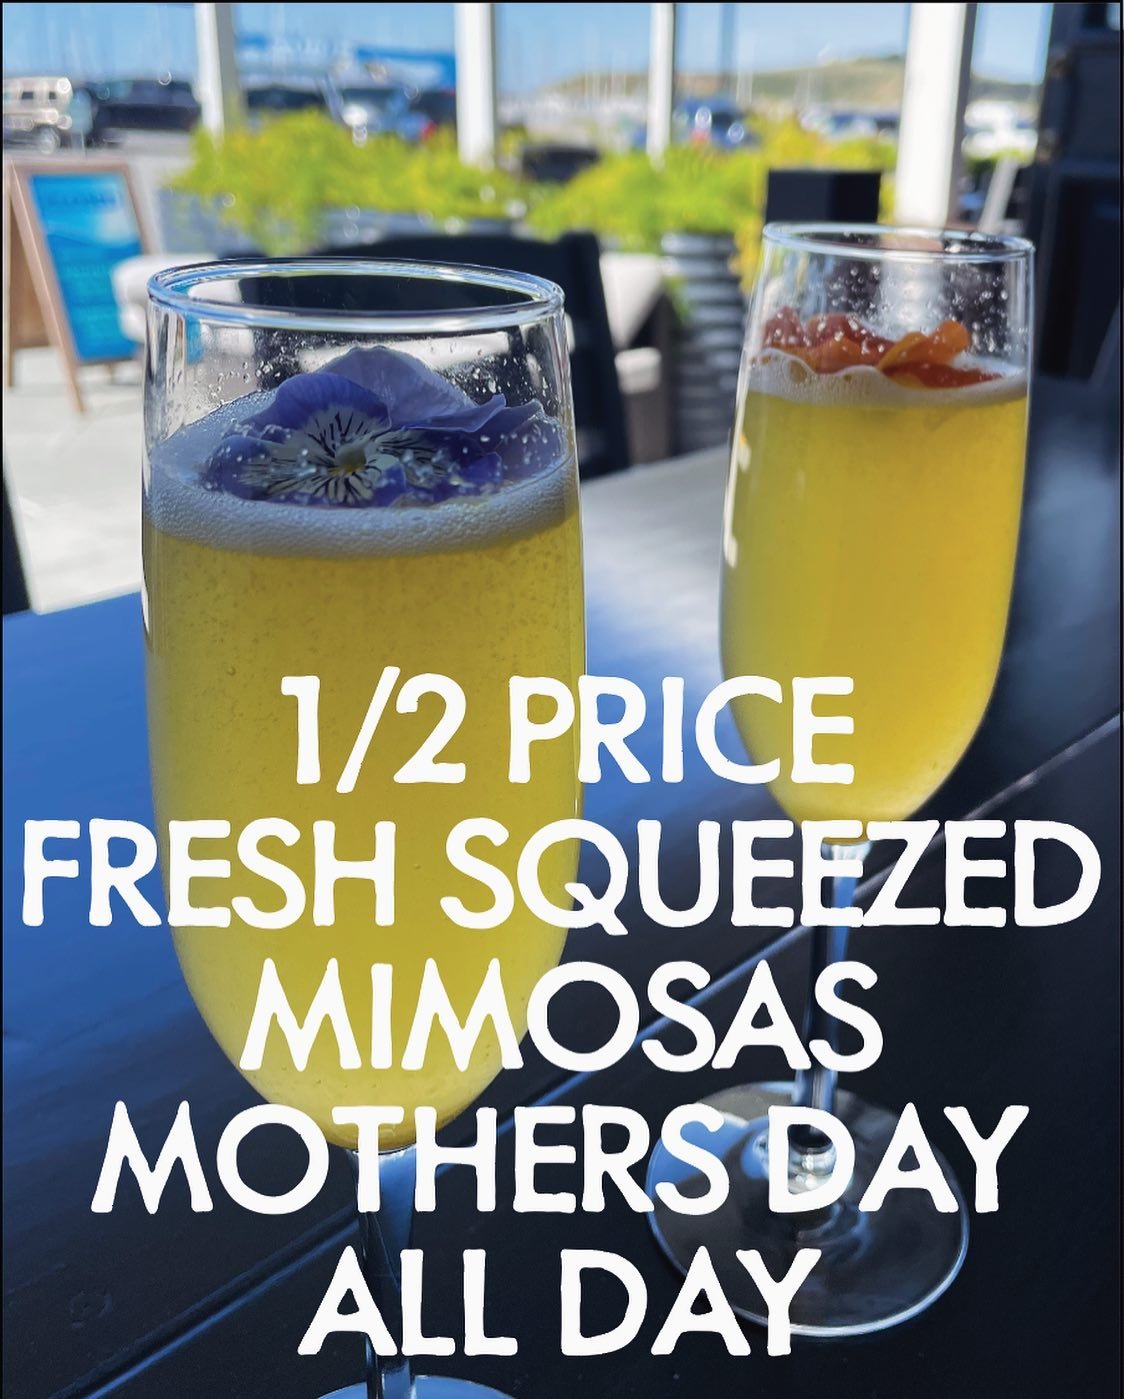 Let&rsquo;s toast our lovely mothers with fresh squeezed mimosas half price all day Sunday!!! The Coast weather will be perfect!!